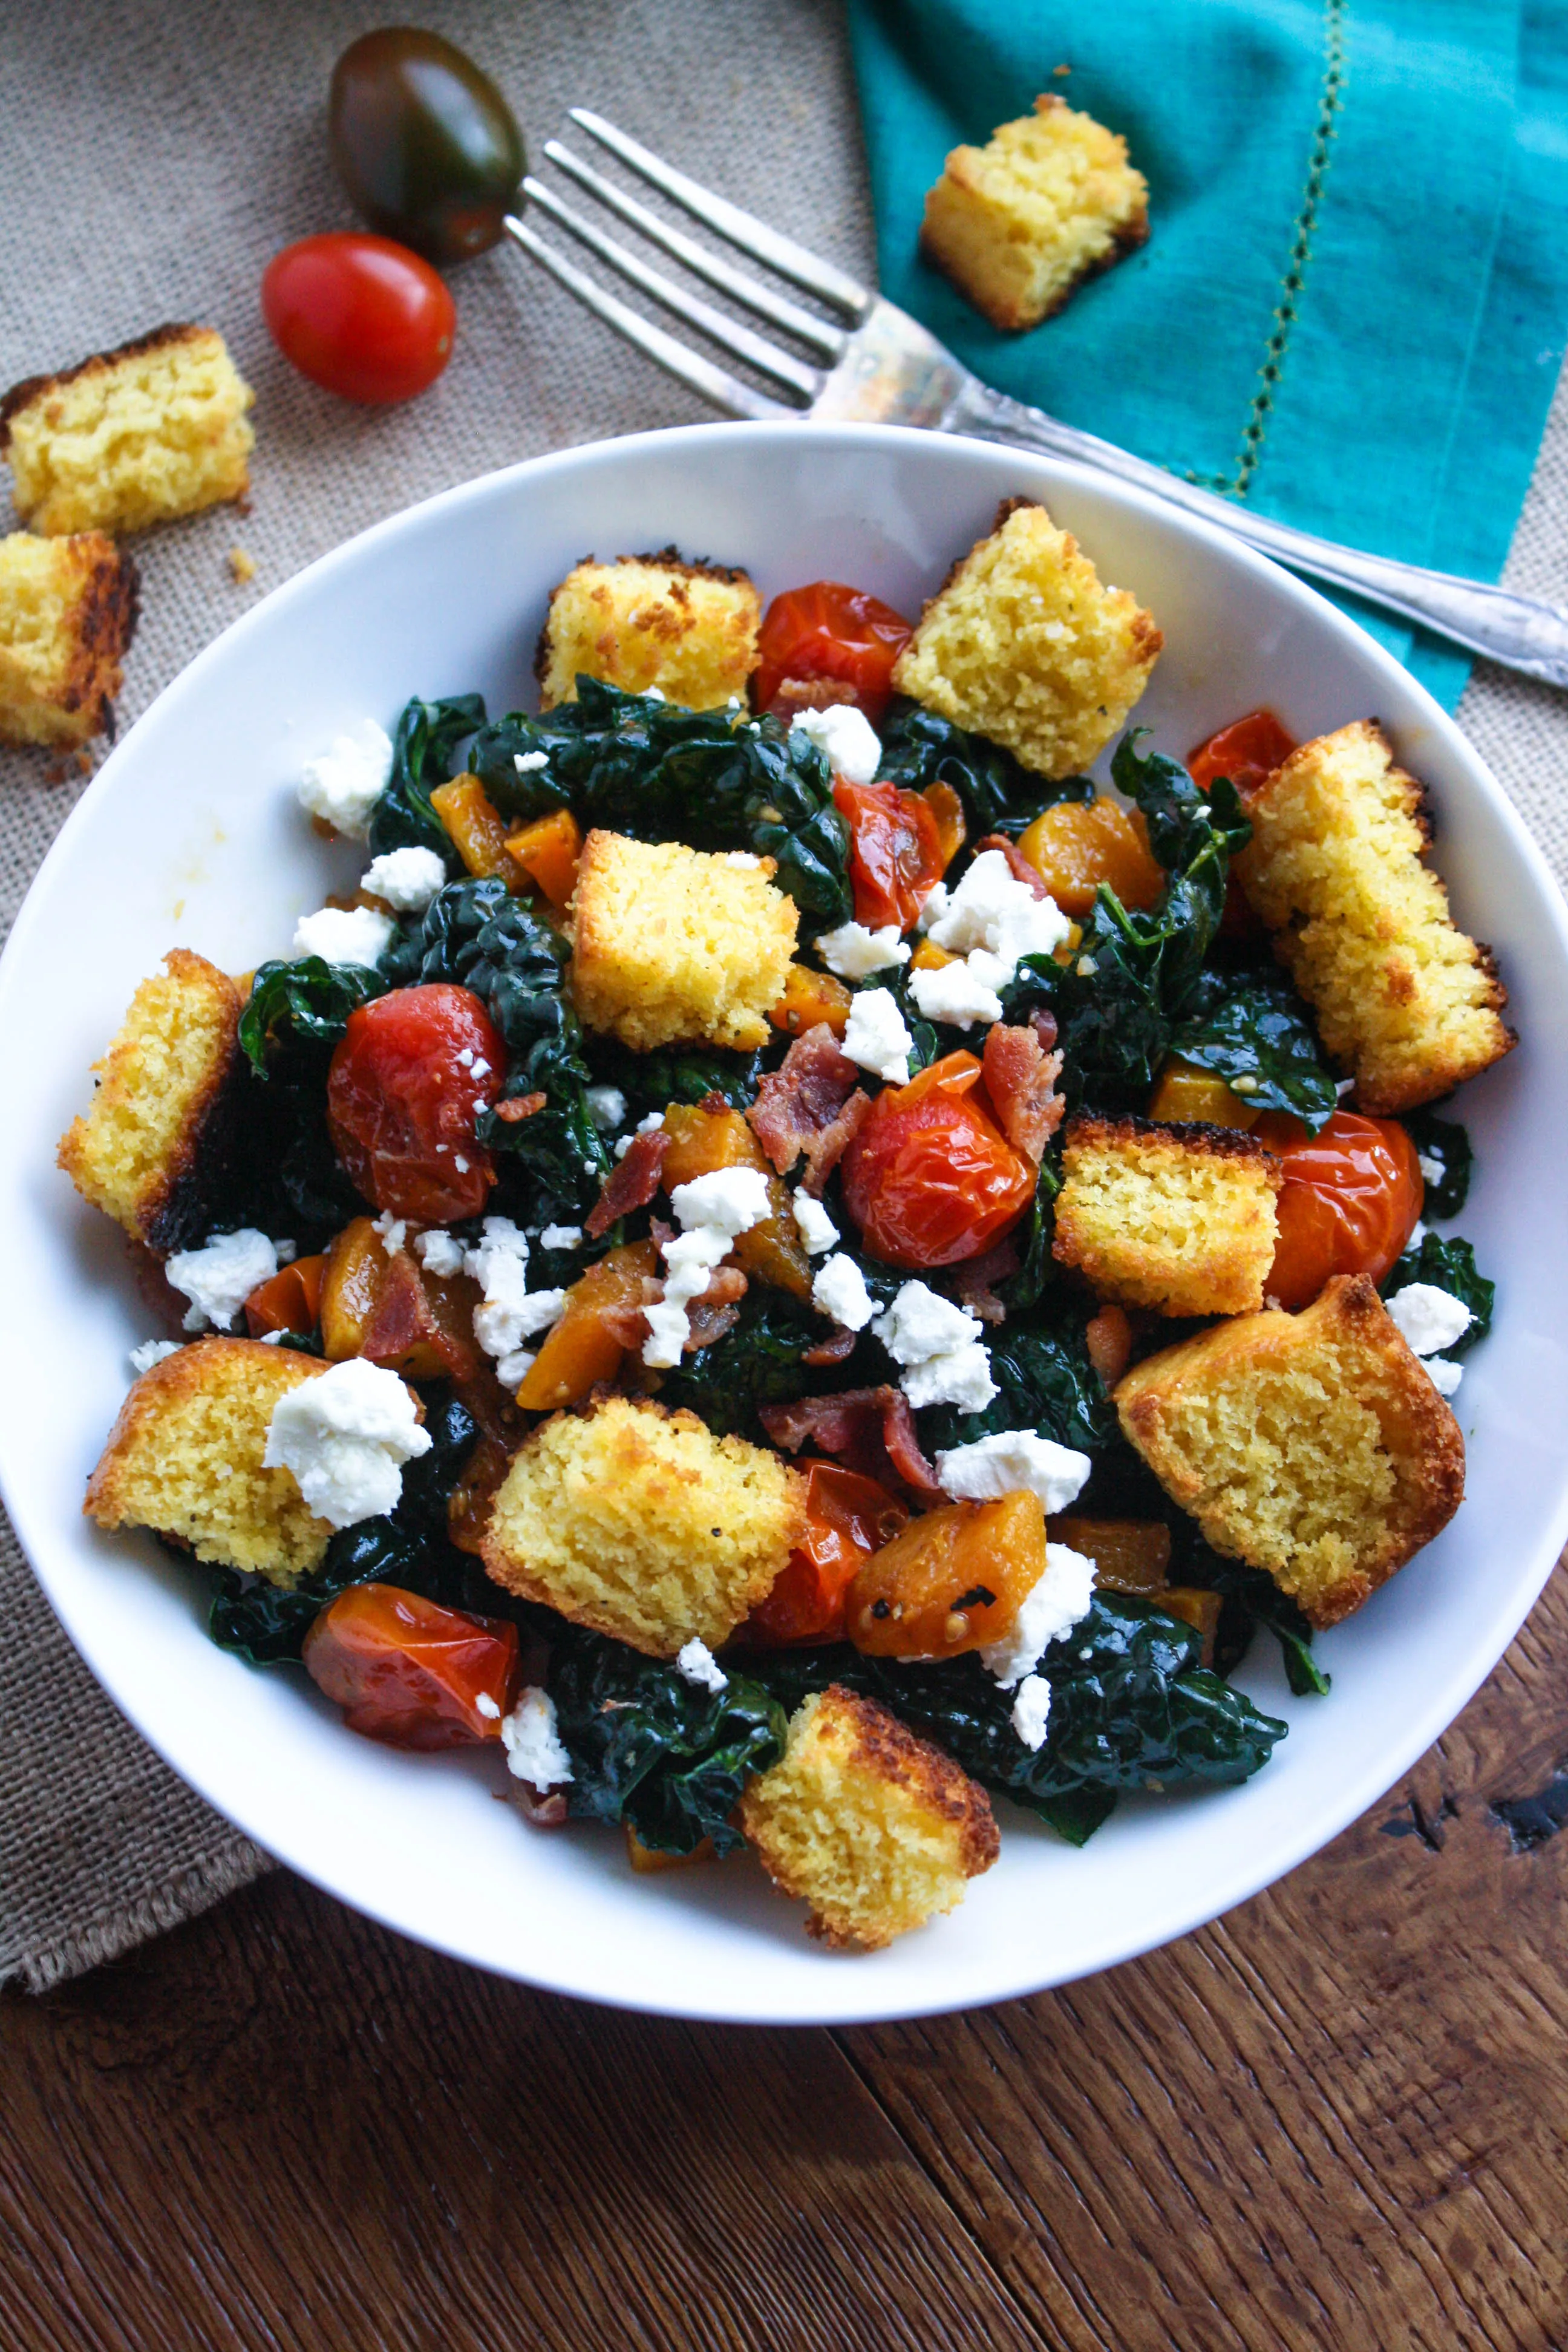 Kale and Cornbread Crouton Salad is a great salad to serve after an indulgent holiday! The cornbread croutons are a great addition to this kale salad.